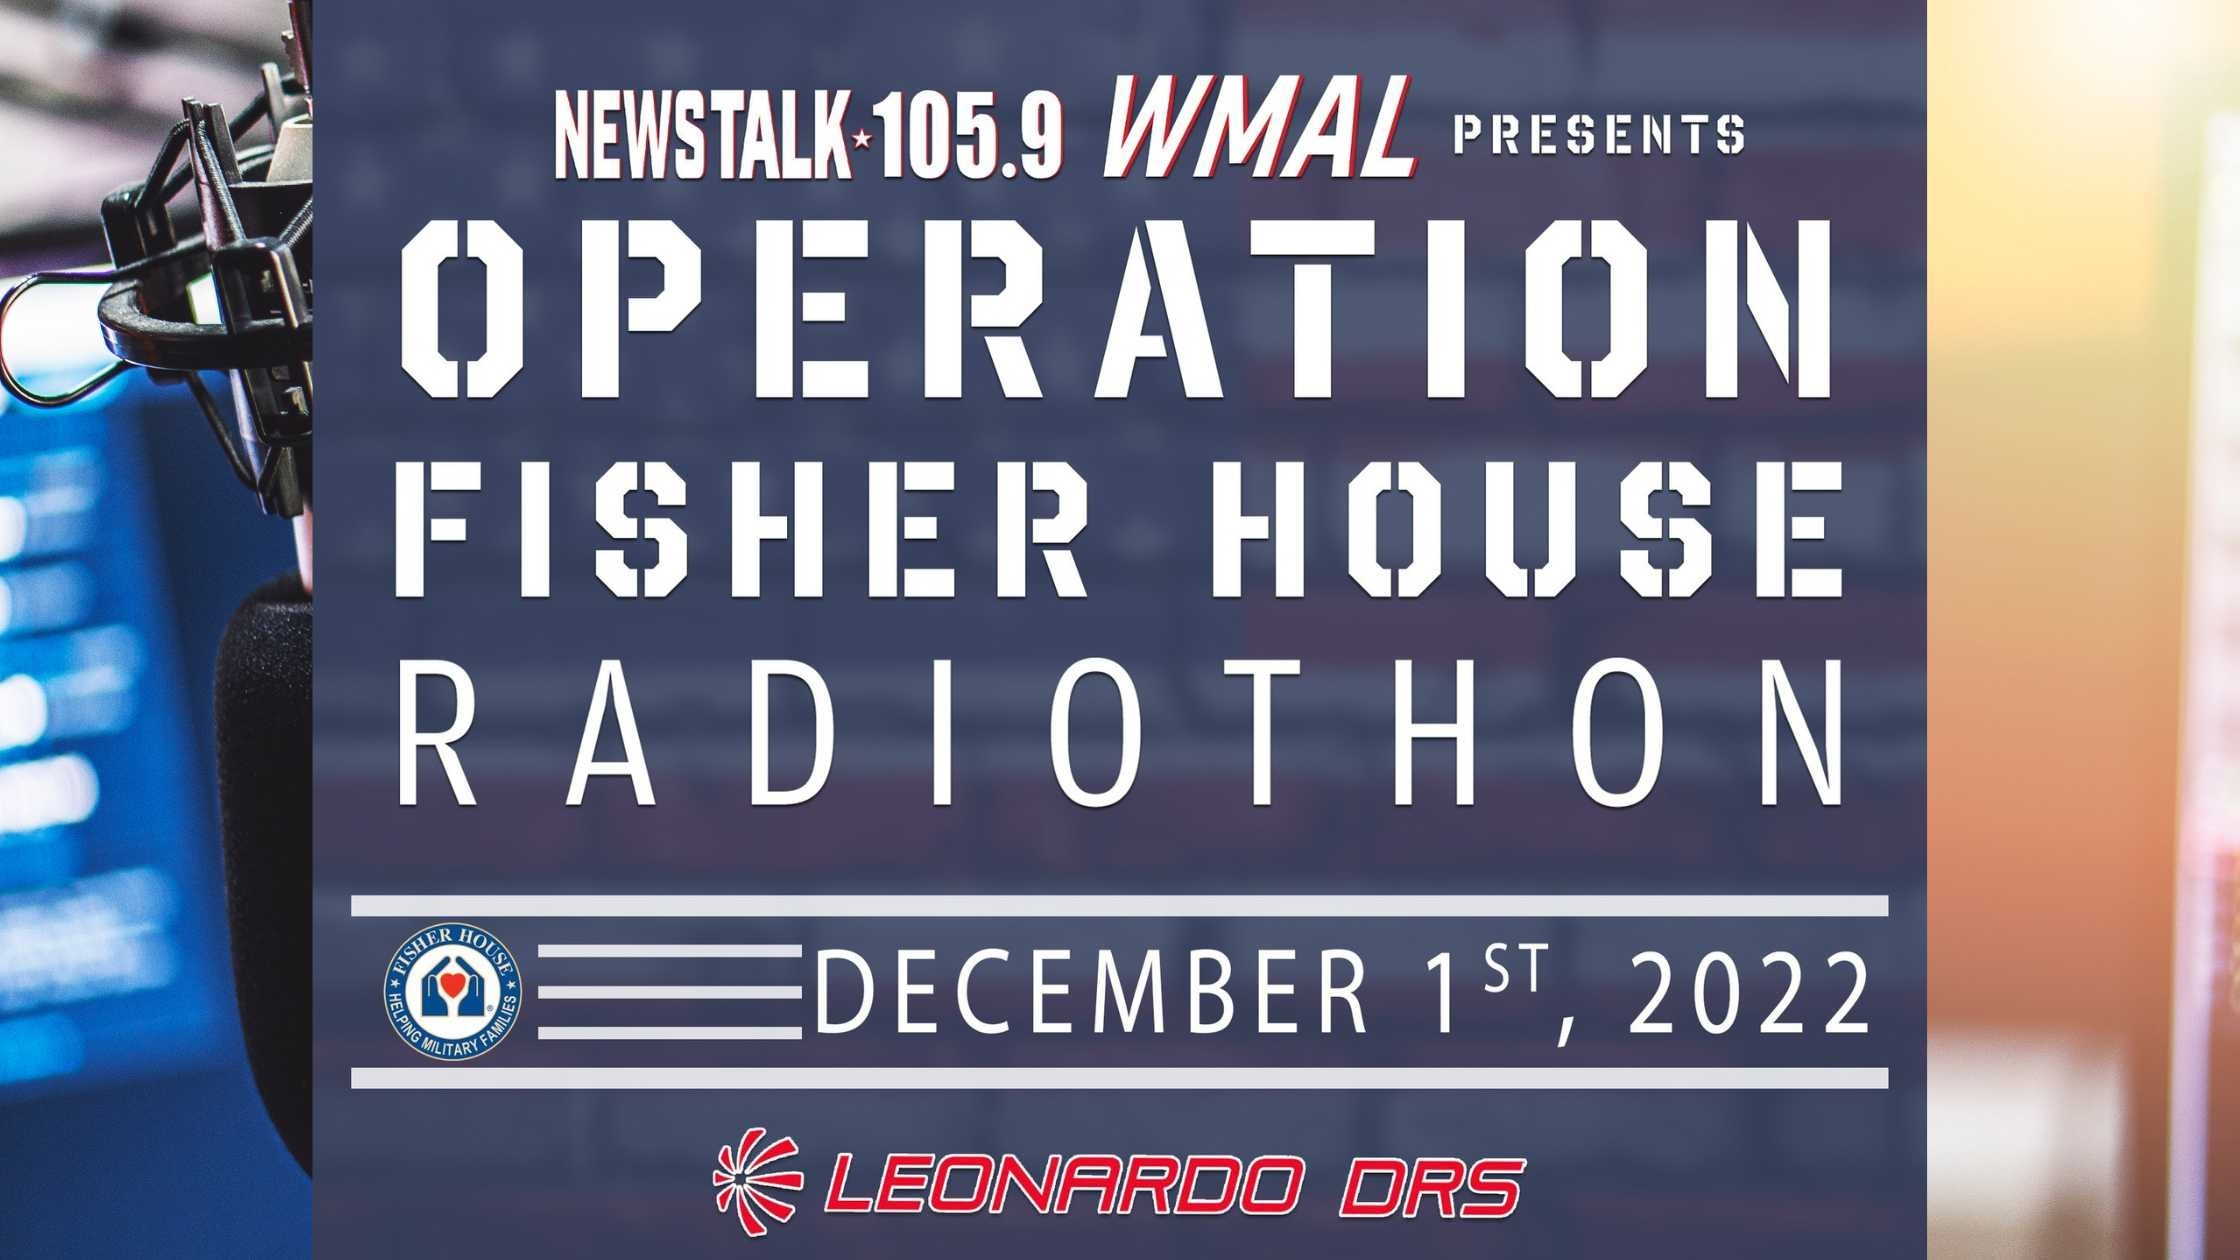 Sarah Reynolds Joins 105.9 WMAL For The Fisher House Radiothon!